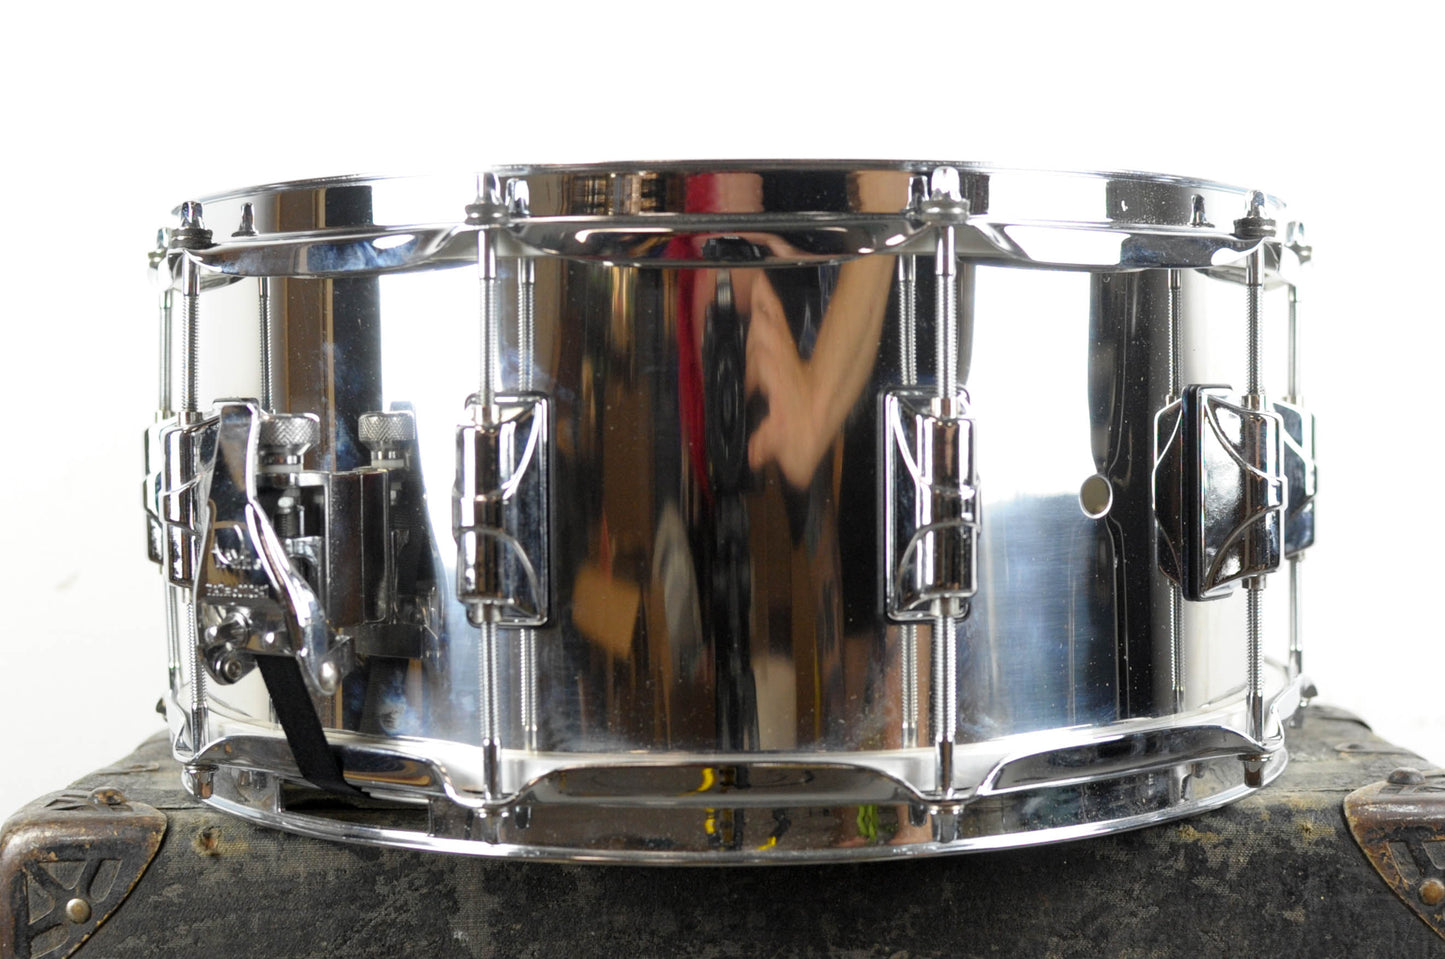 Taye Model SS1465 Stainless Steel 6.5x14 Snare Drum